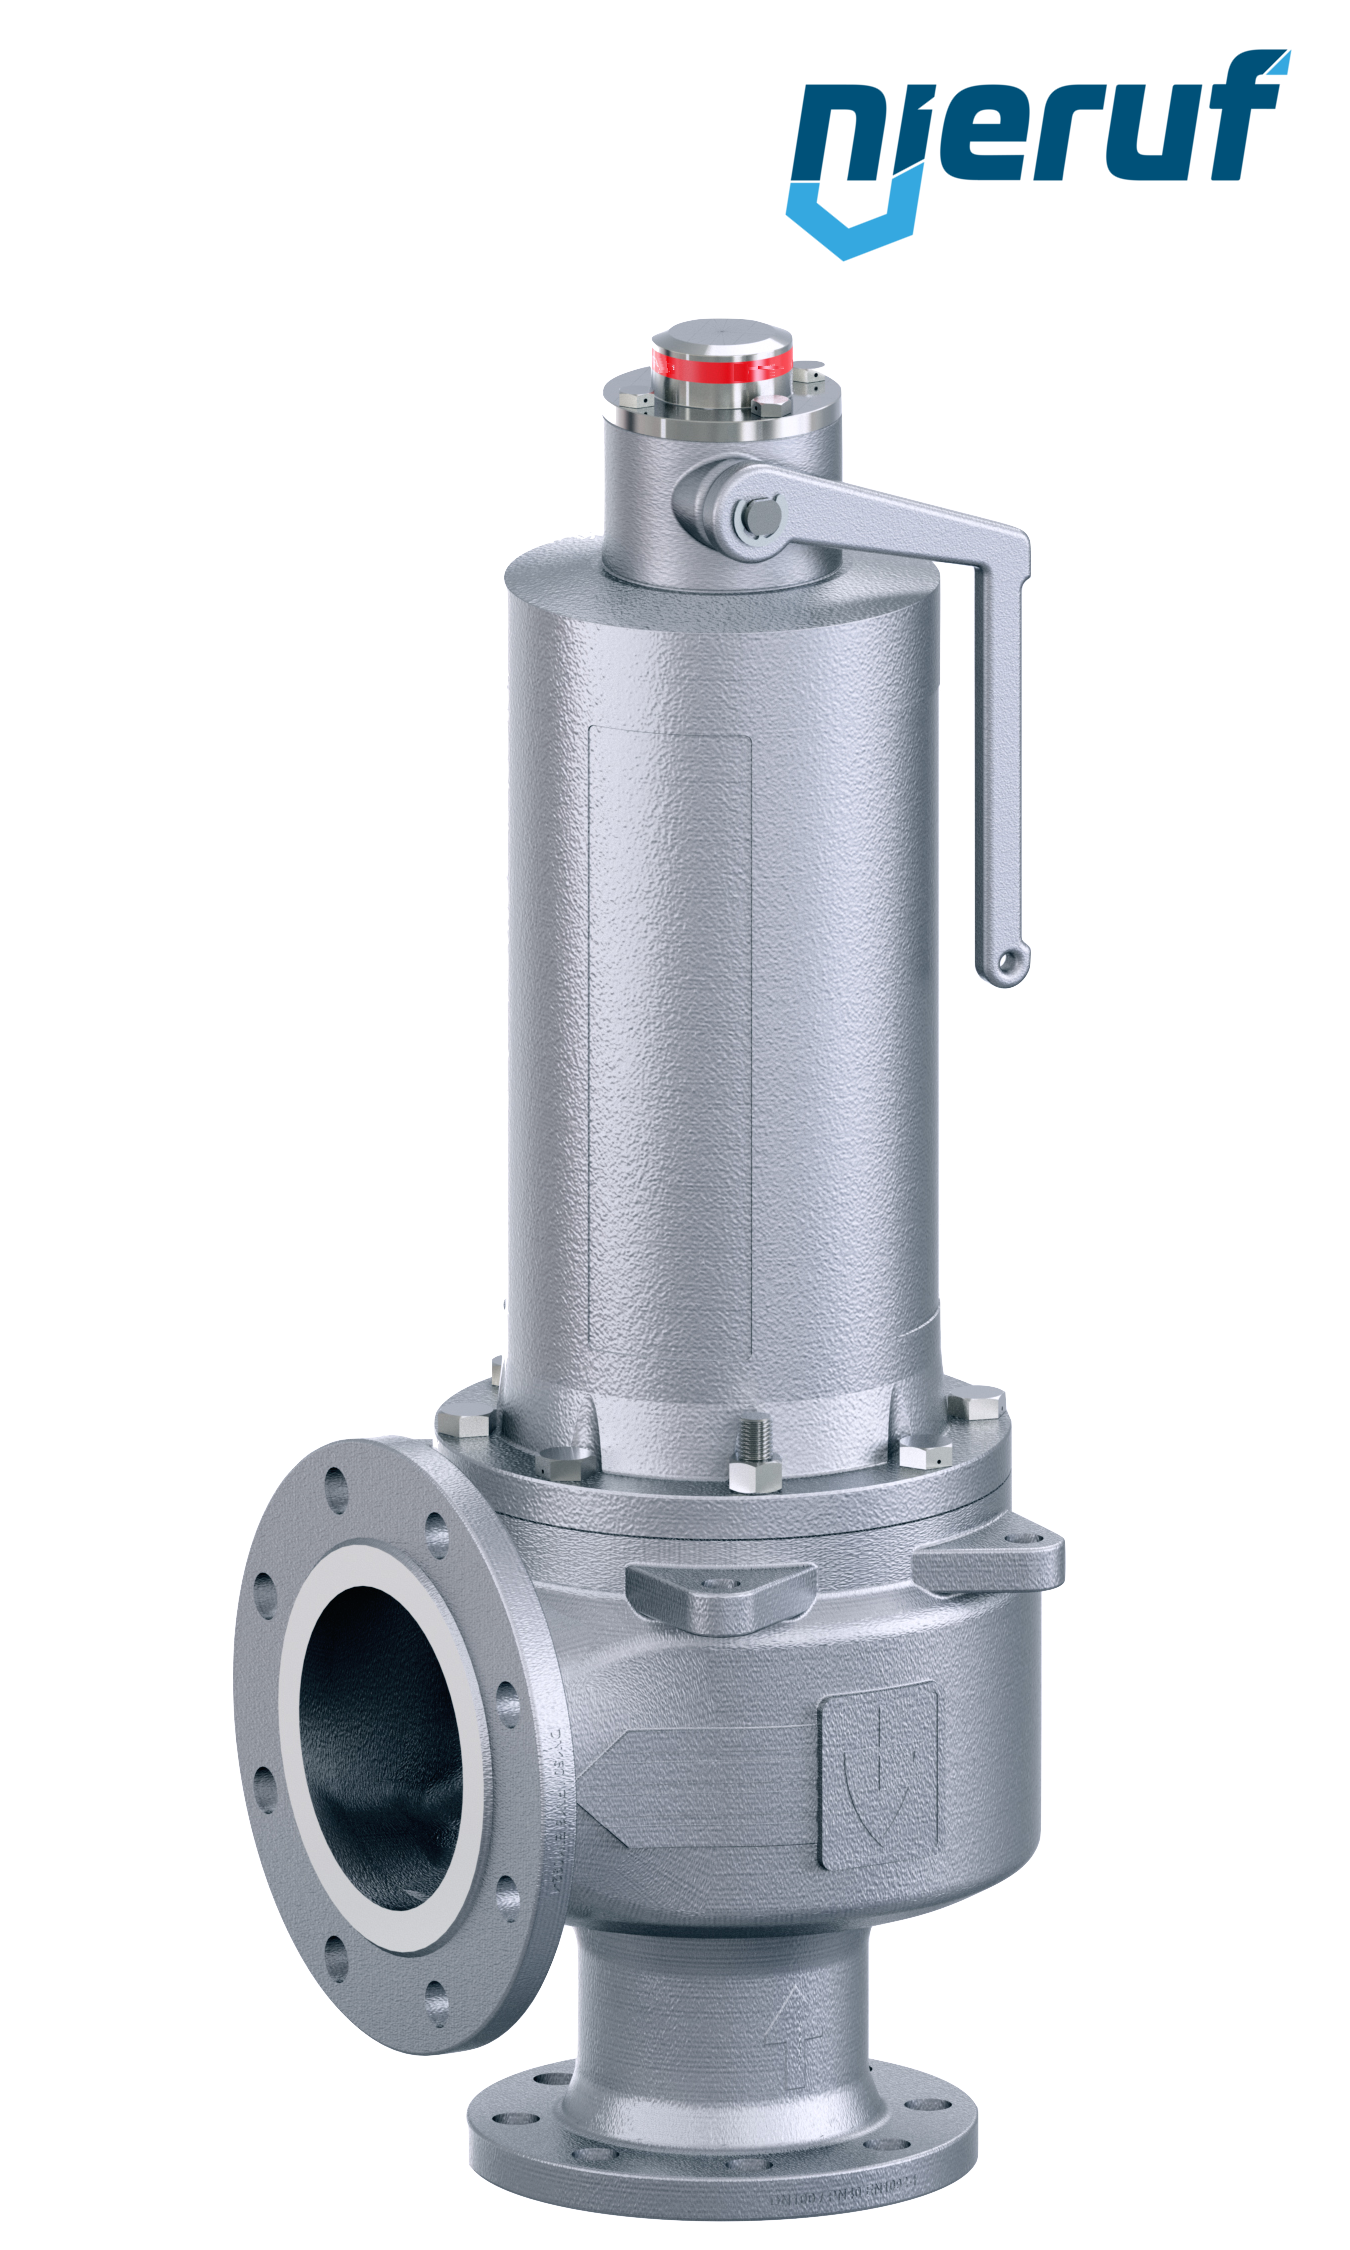 flange-safety valve DN50/DN80 SF04, stainless steel metal, with lifting device lever